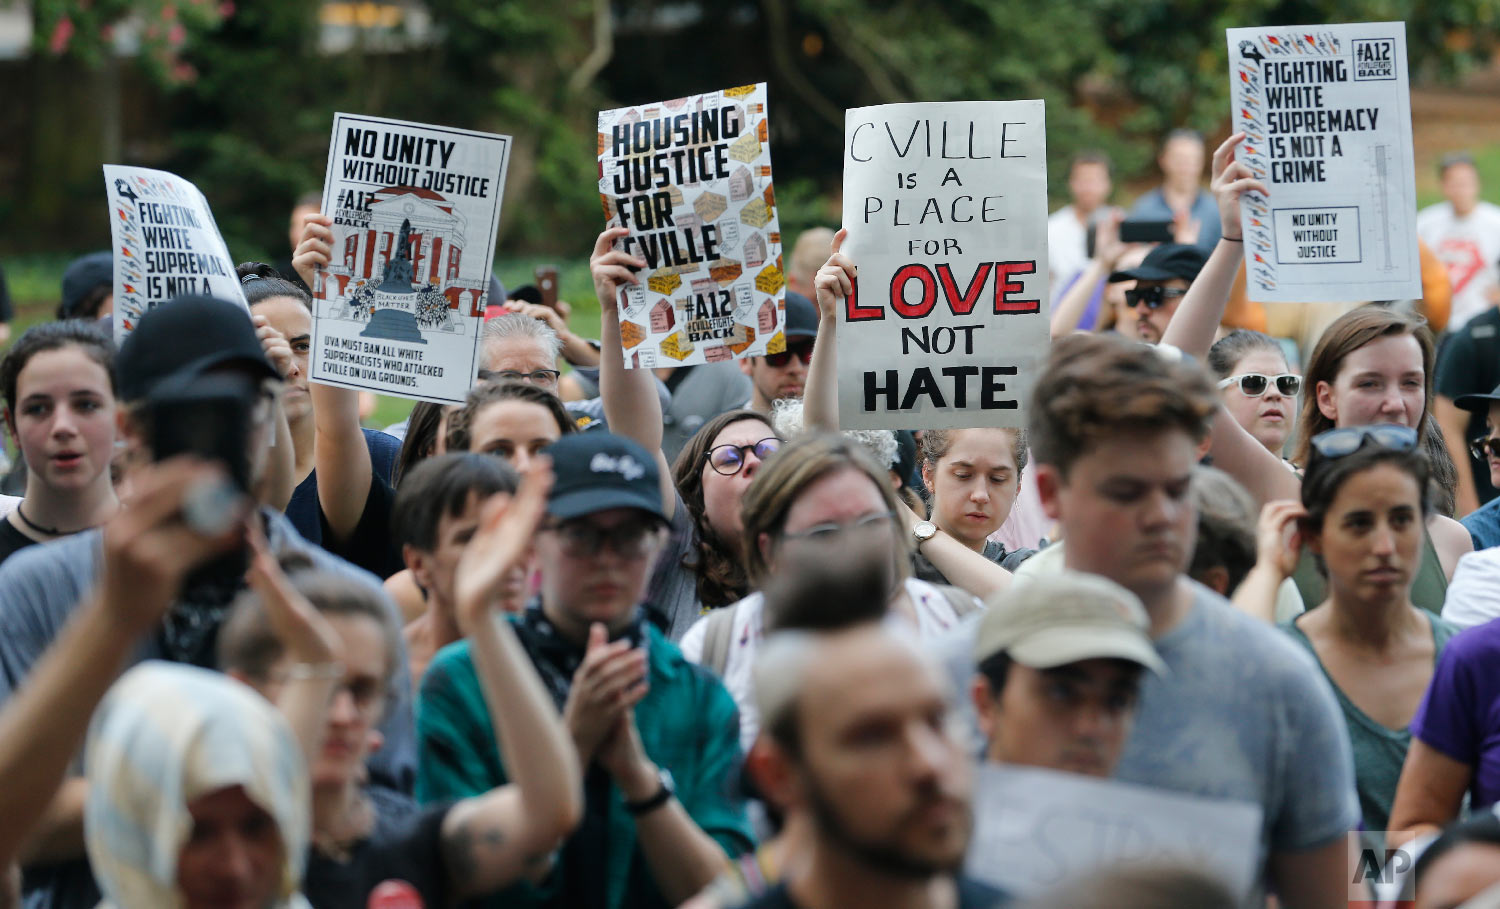  Demonstrators march on the campus of the University of Virginia in anticipation of the anniversary of last year's Unite the Right rally in Charlottesville, Va., Saturday, Aug. 11, 2018. (AP Photo/Steve Helber) 